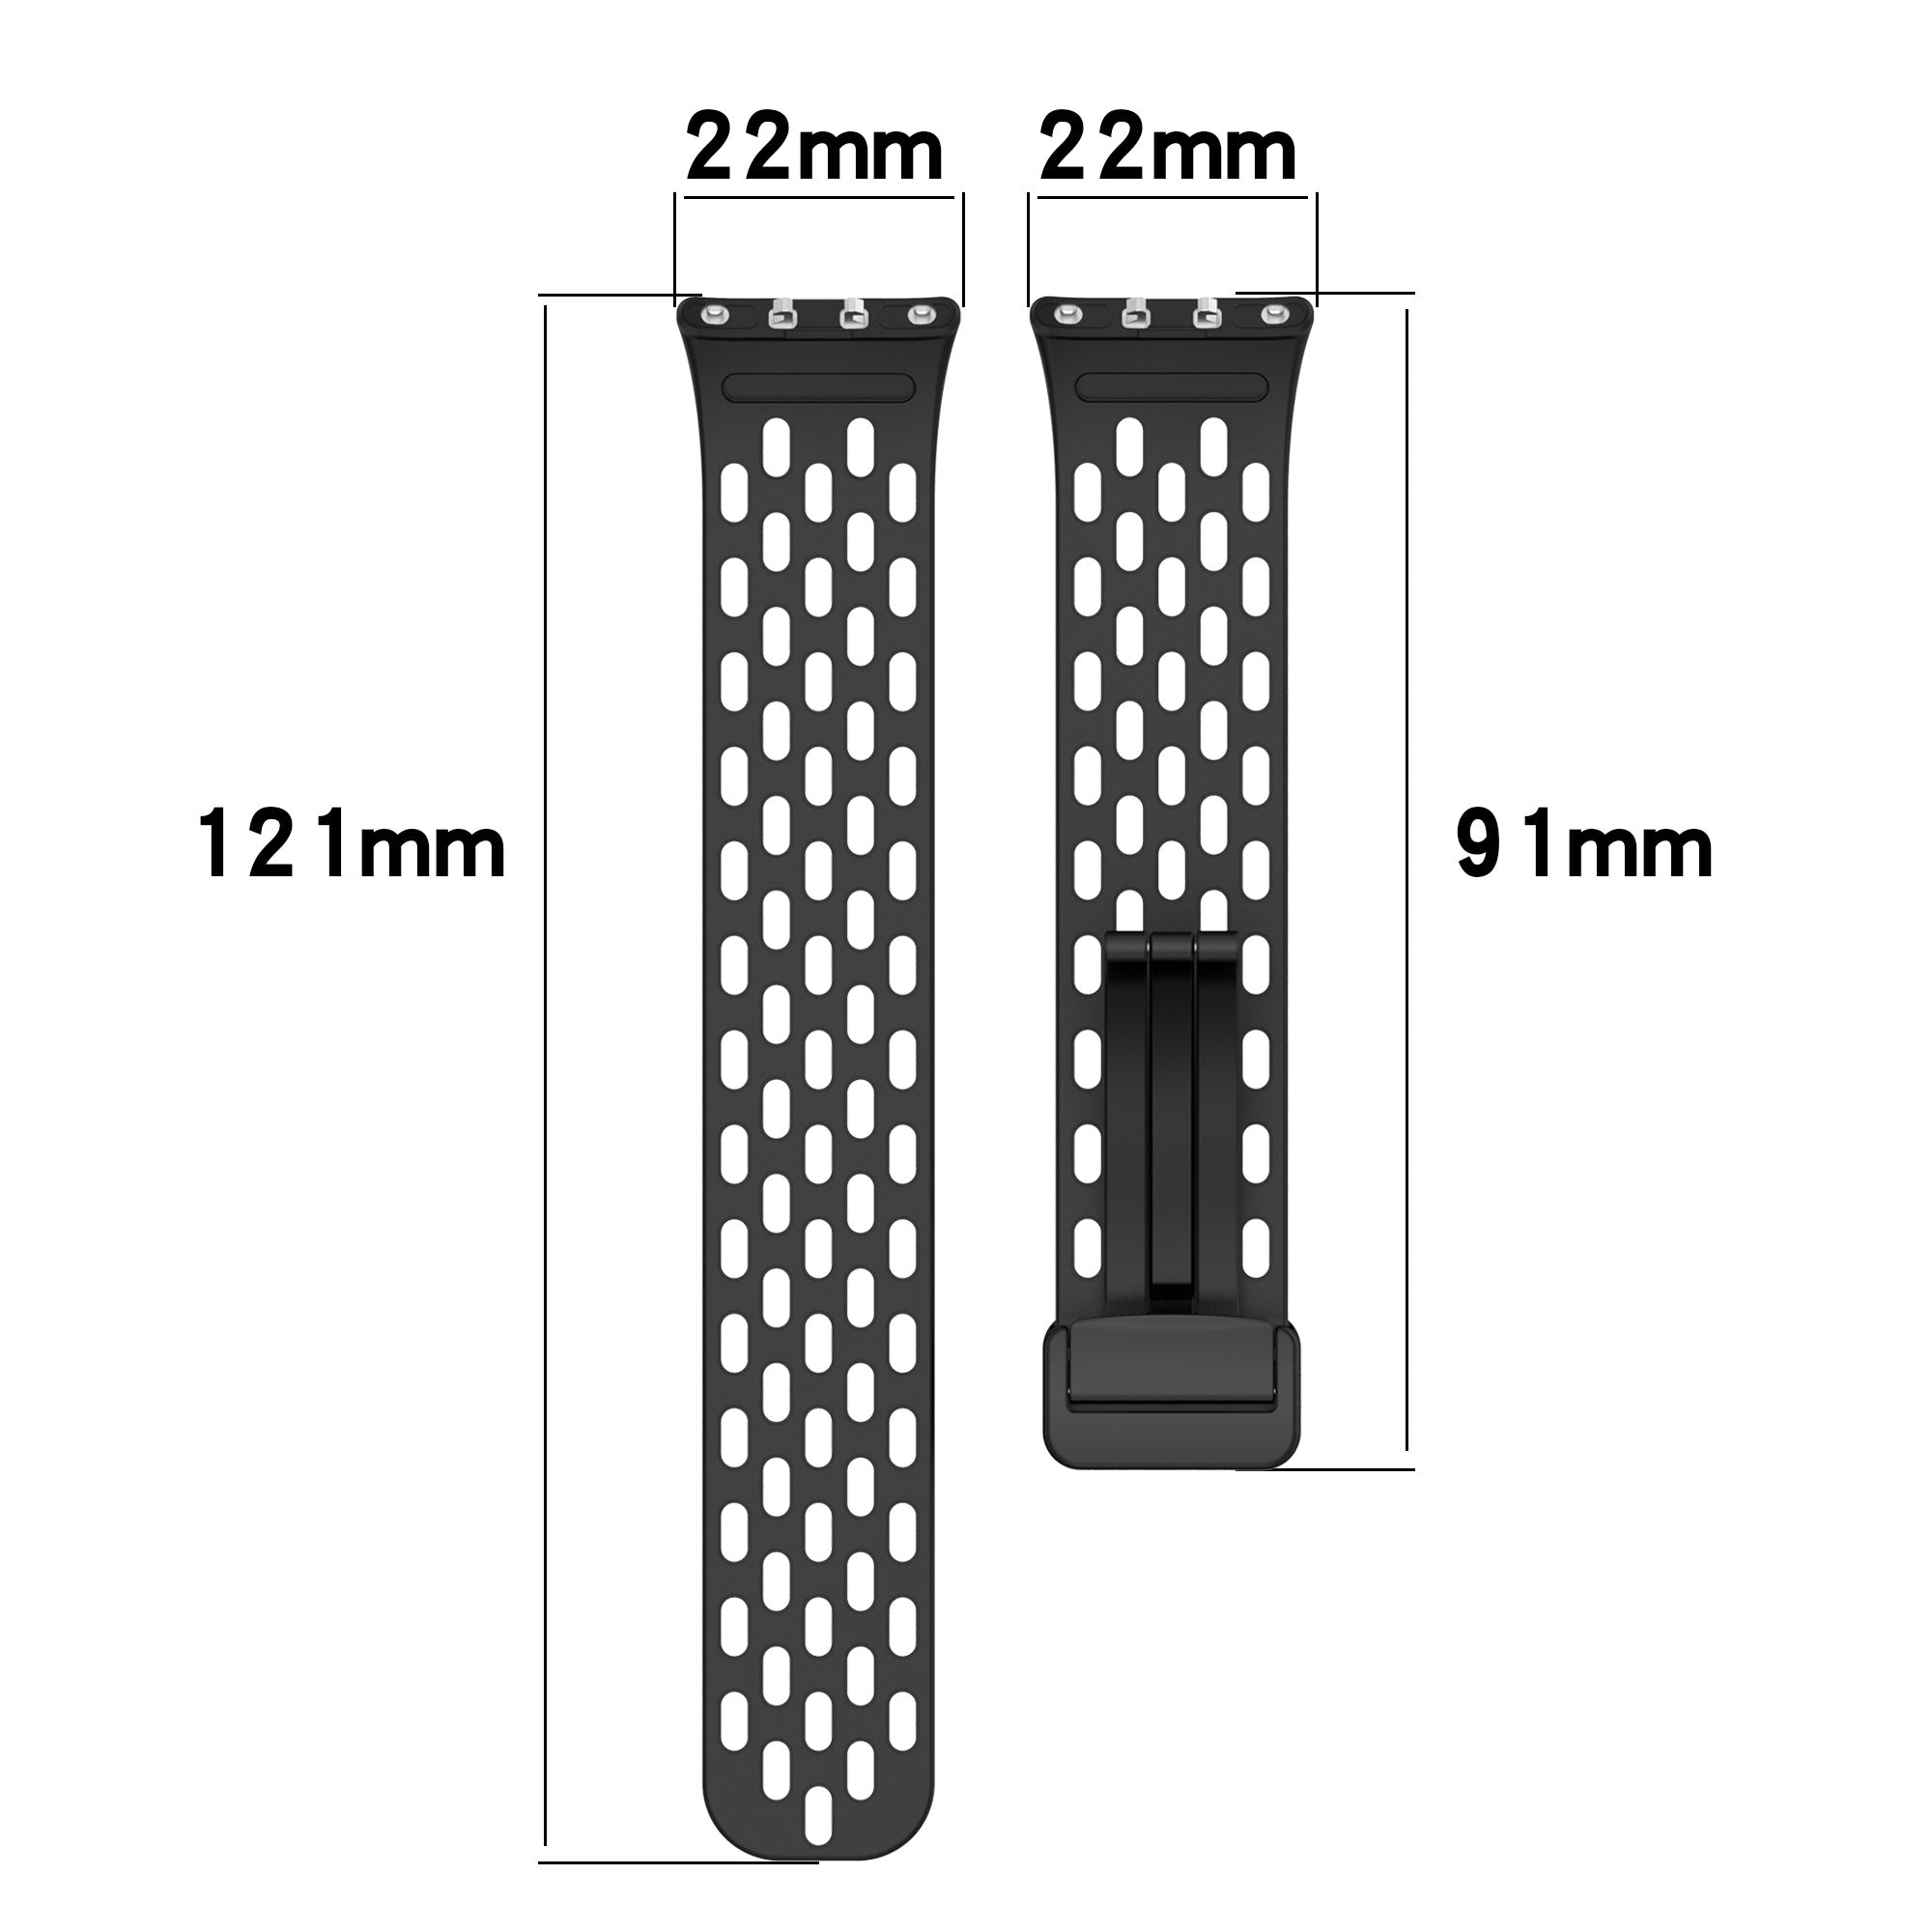 Wrist Band for Samsung Galaxy Fit3 R930 Magnetic Silicone Smartwatch Bracelet Strap - White